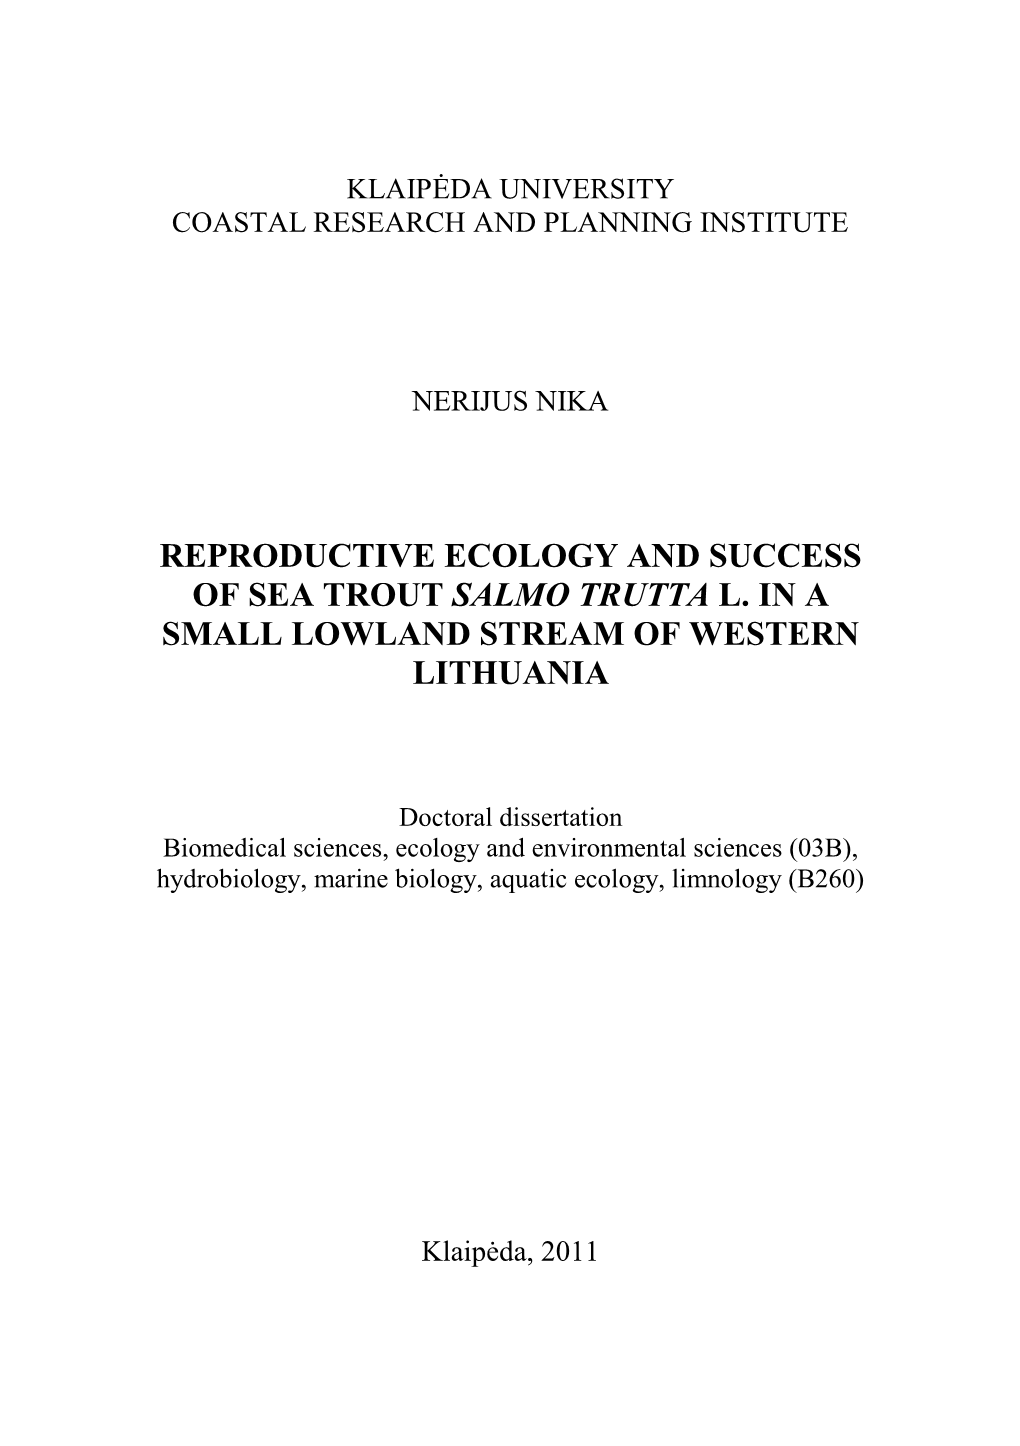 Reproductive Ecology and Success of Sea Trout Salmo Trutta L. in a Small Lowland Stream of Western Lithuania